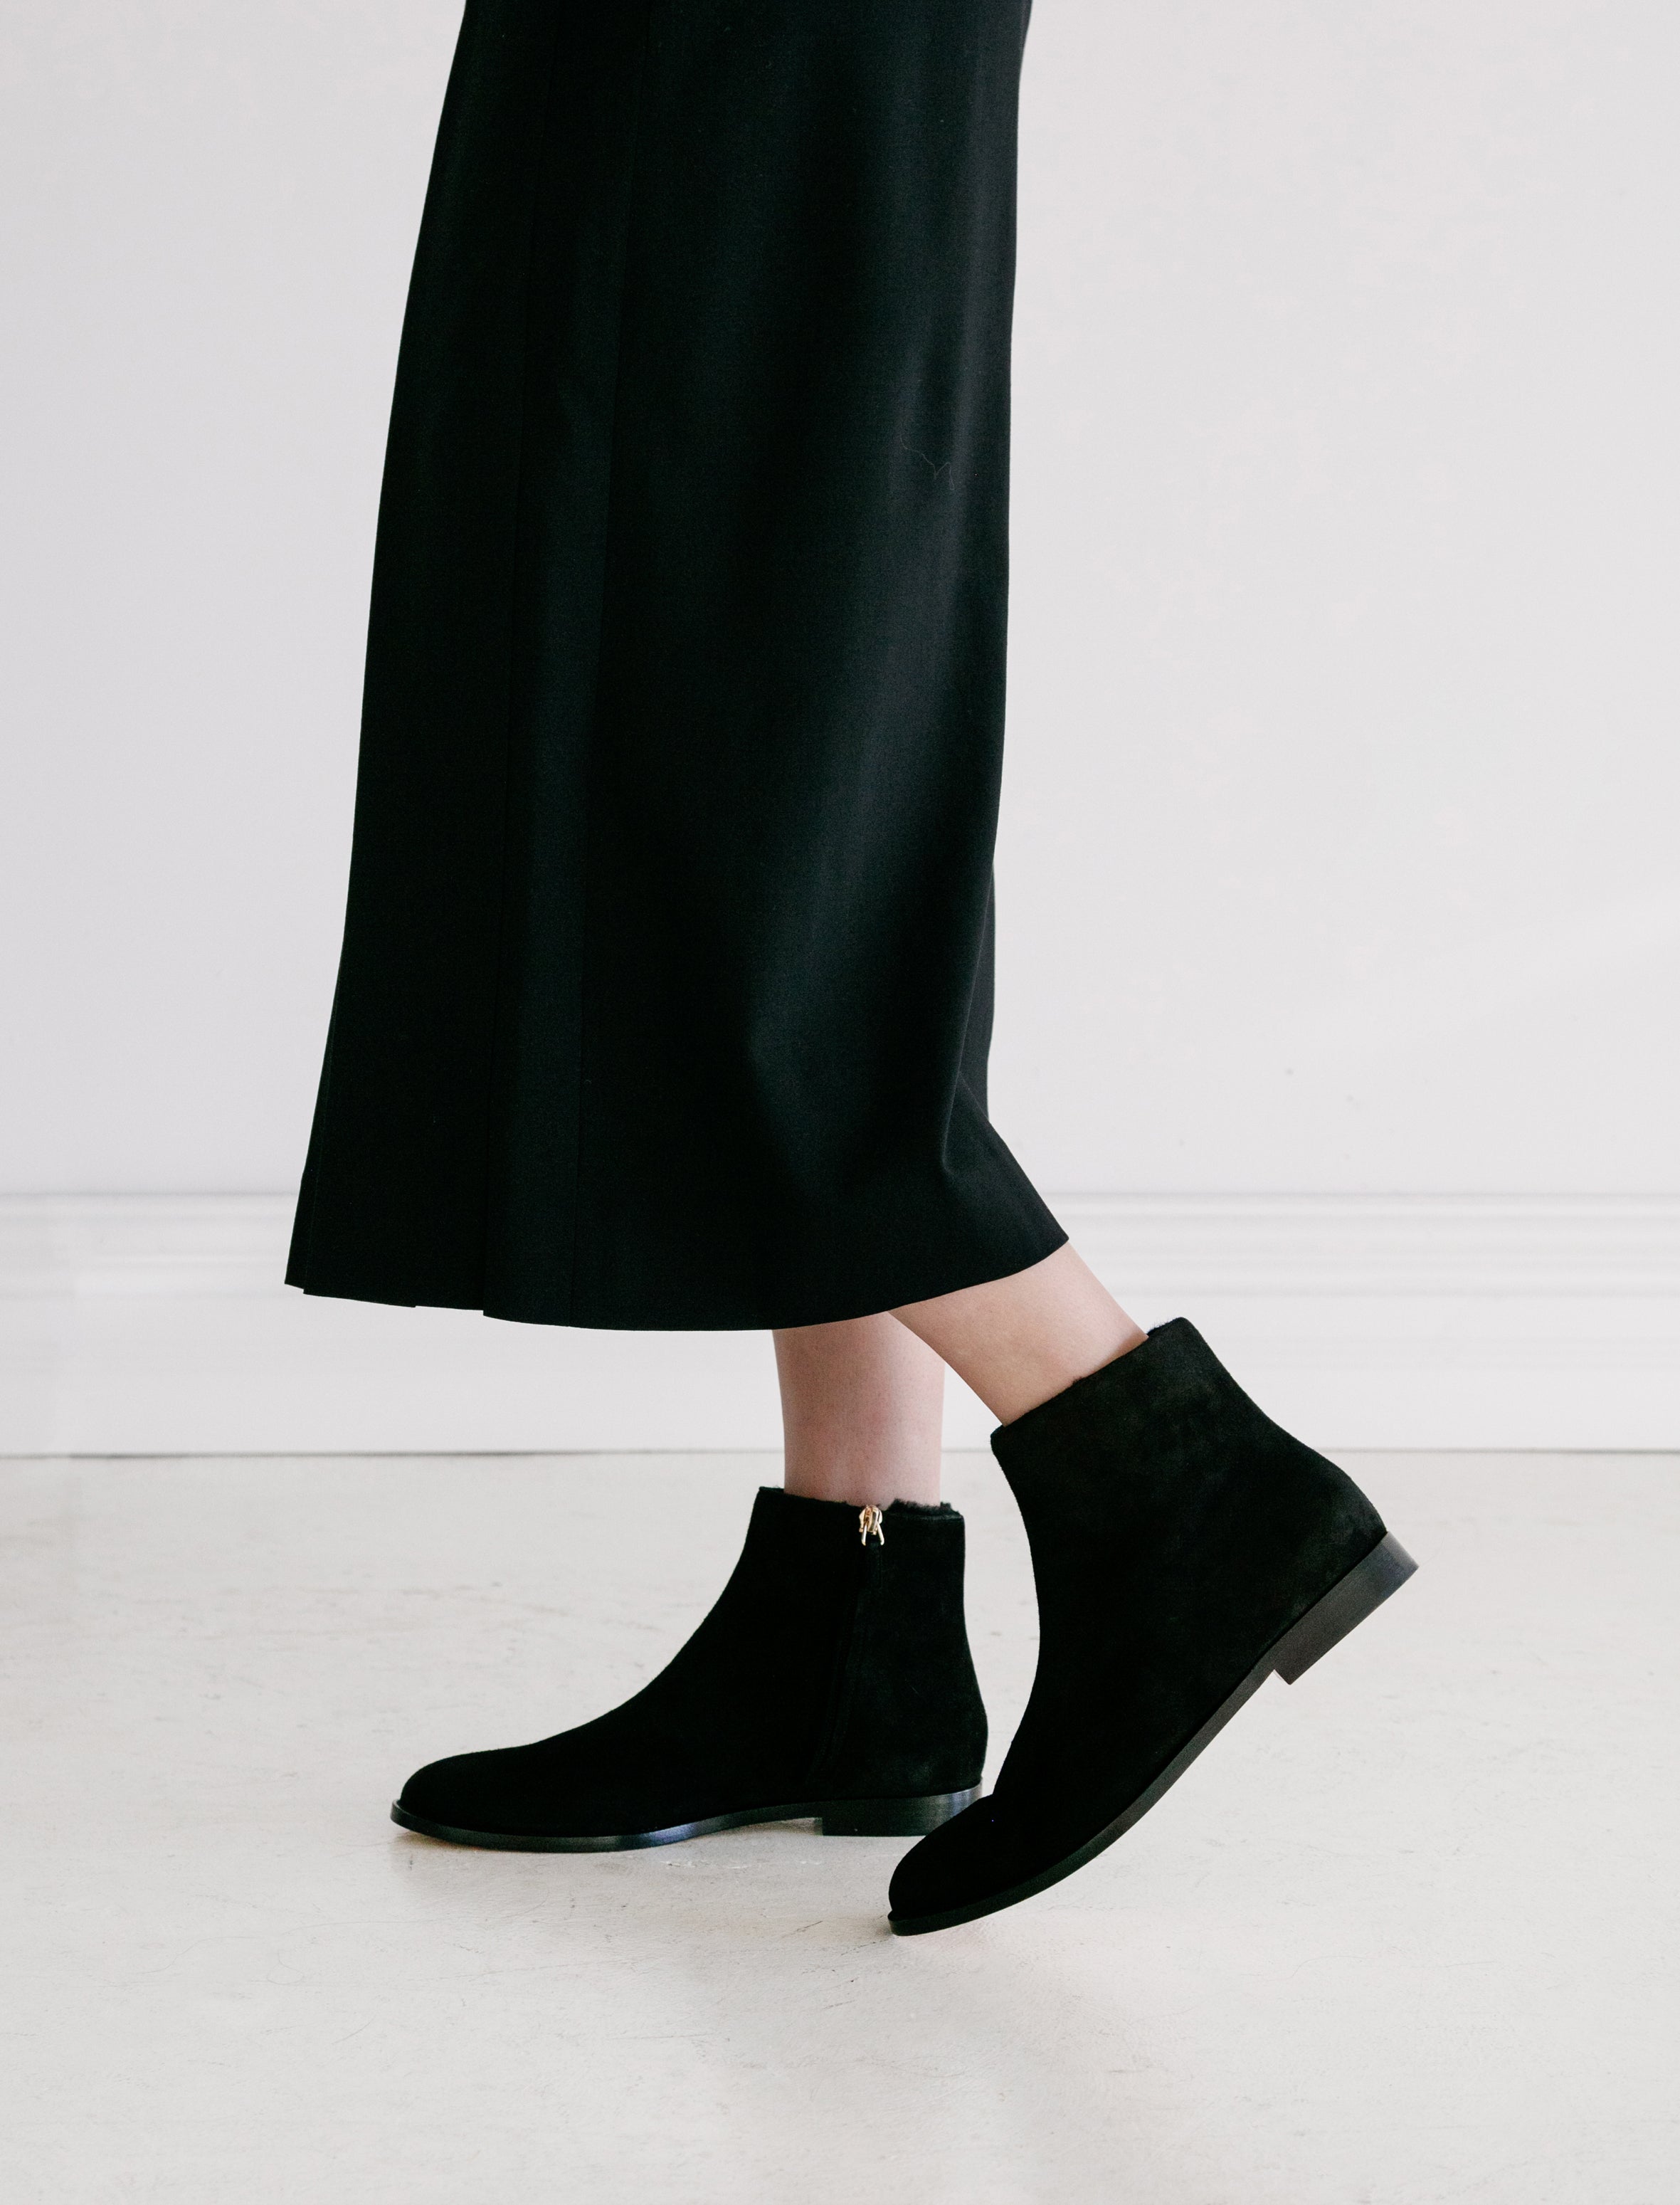 ankle sheepskin boots